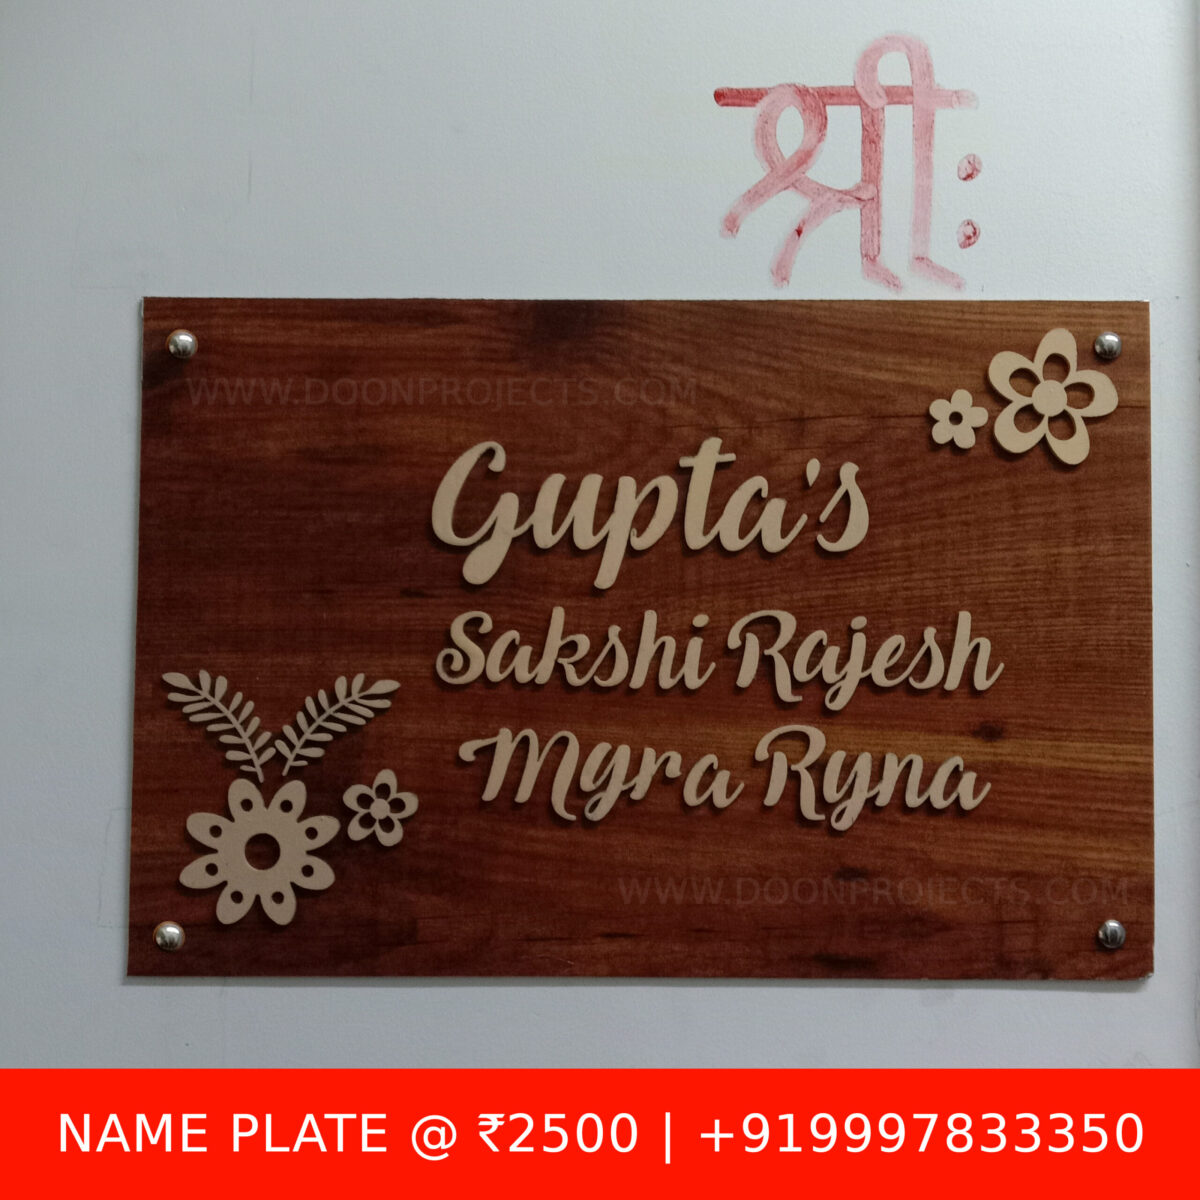 House Name Plates – Doon Projects